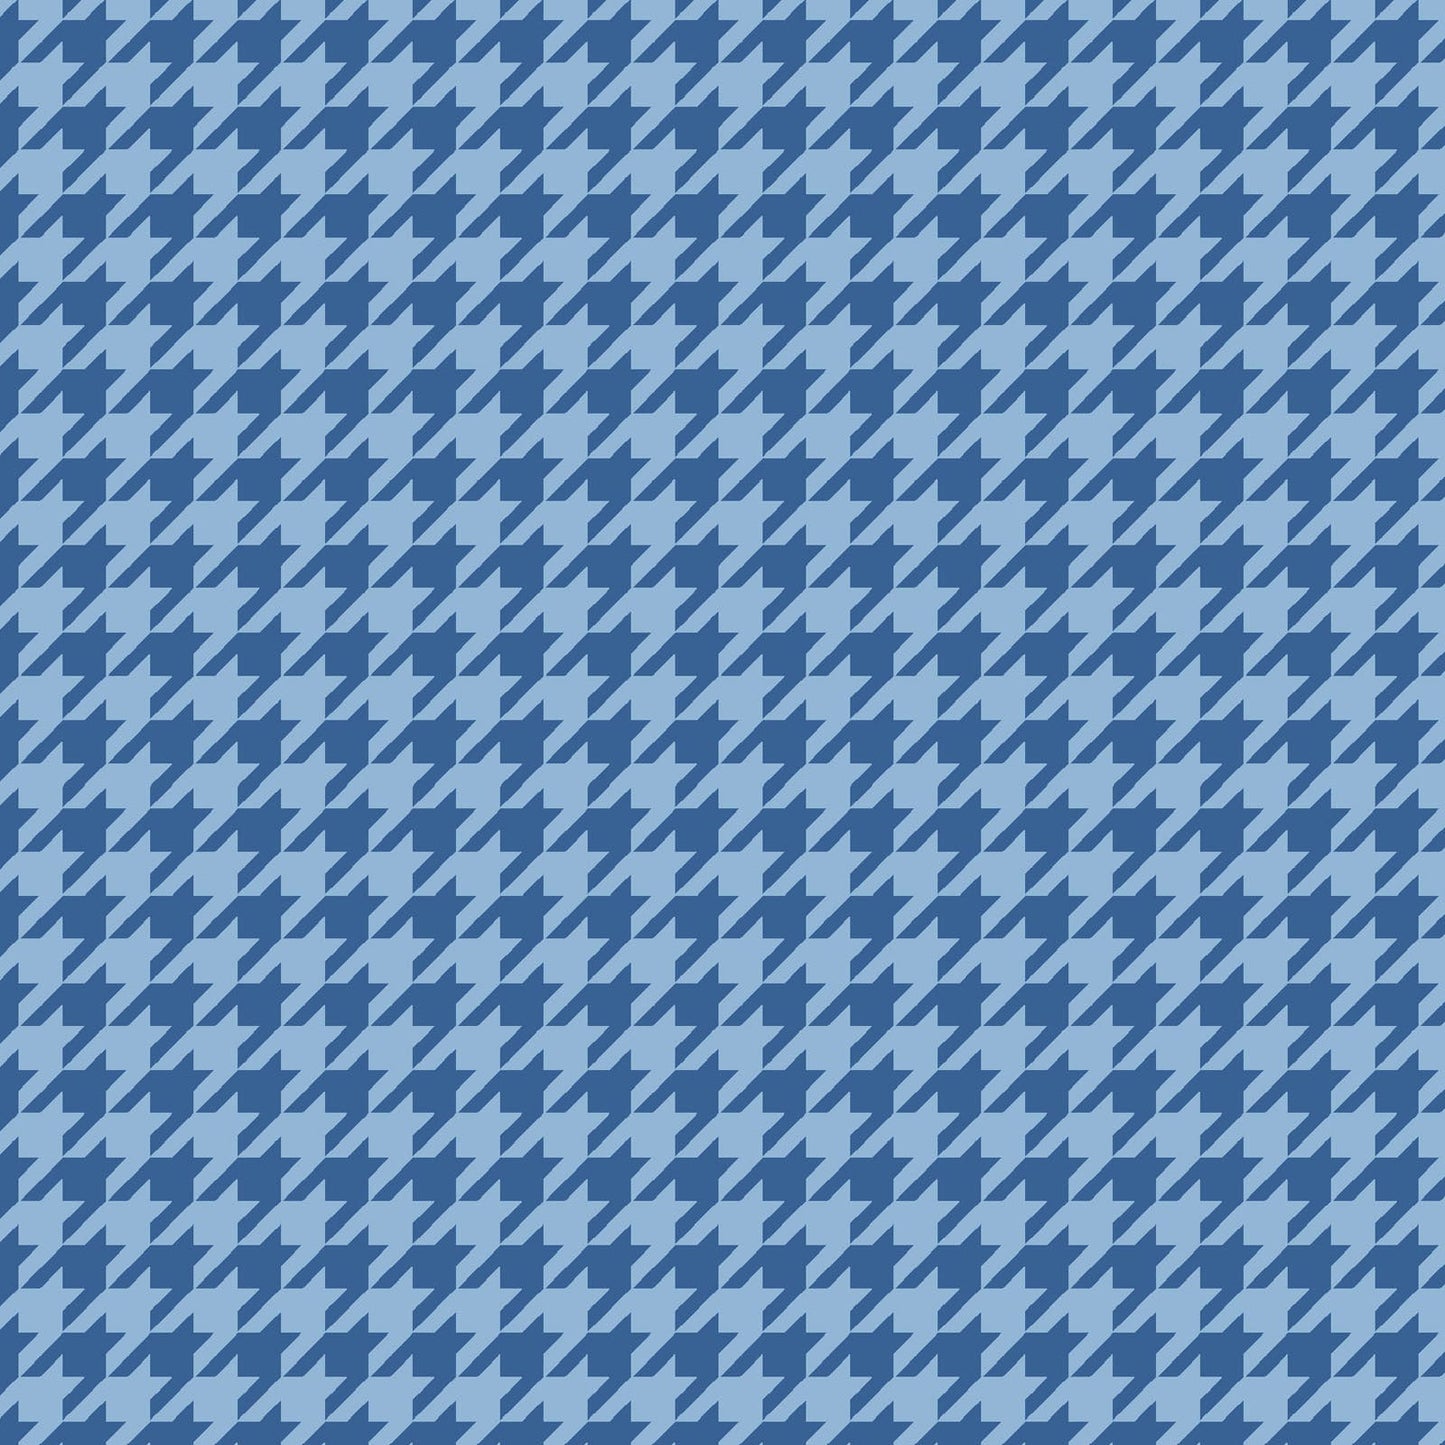 Blue on Blue Houndstooth (MAS8206-BB) from the Kimberbell Basics line designed by Kim Christopherson for Maywood Studio. This fabric features a small blue houndstooth print on a blue background to create a tone on tone and is a fantastic choice for adding texture and color to a quilt.